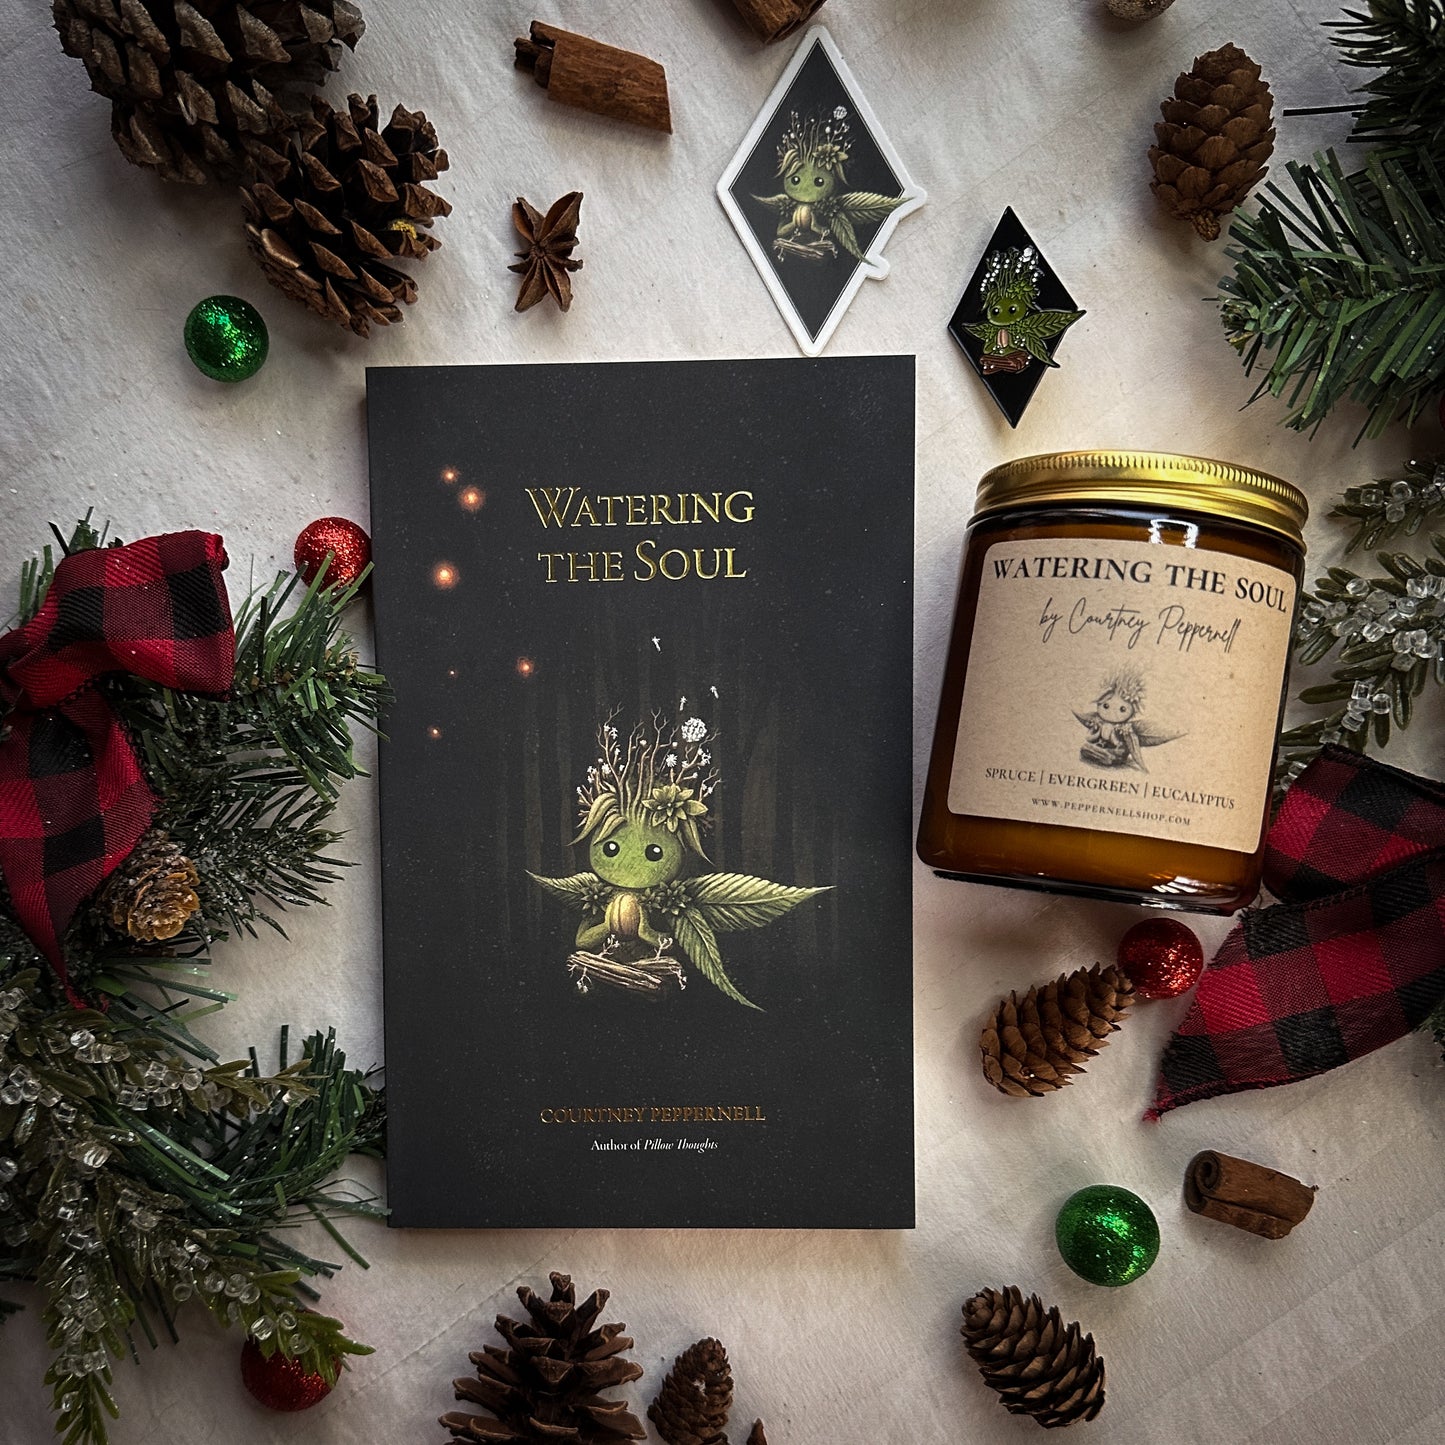 Courtney Peppernell's "Watering the Soul" Limited Edition Holiday Gift Bundle 🎄